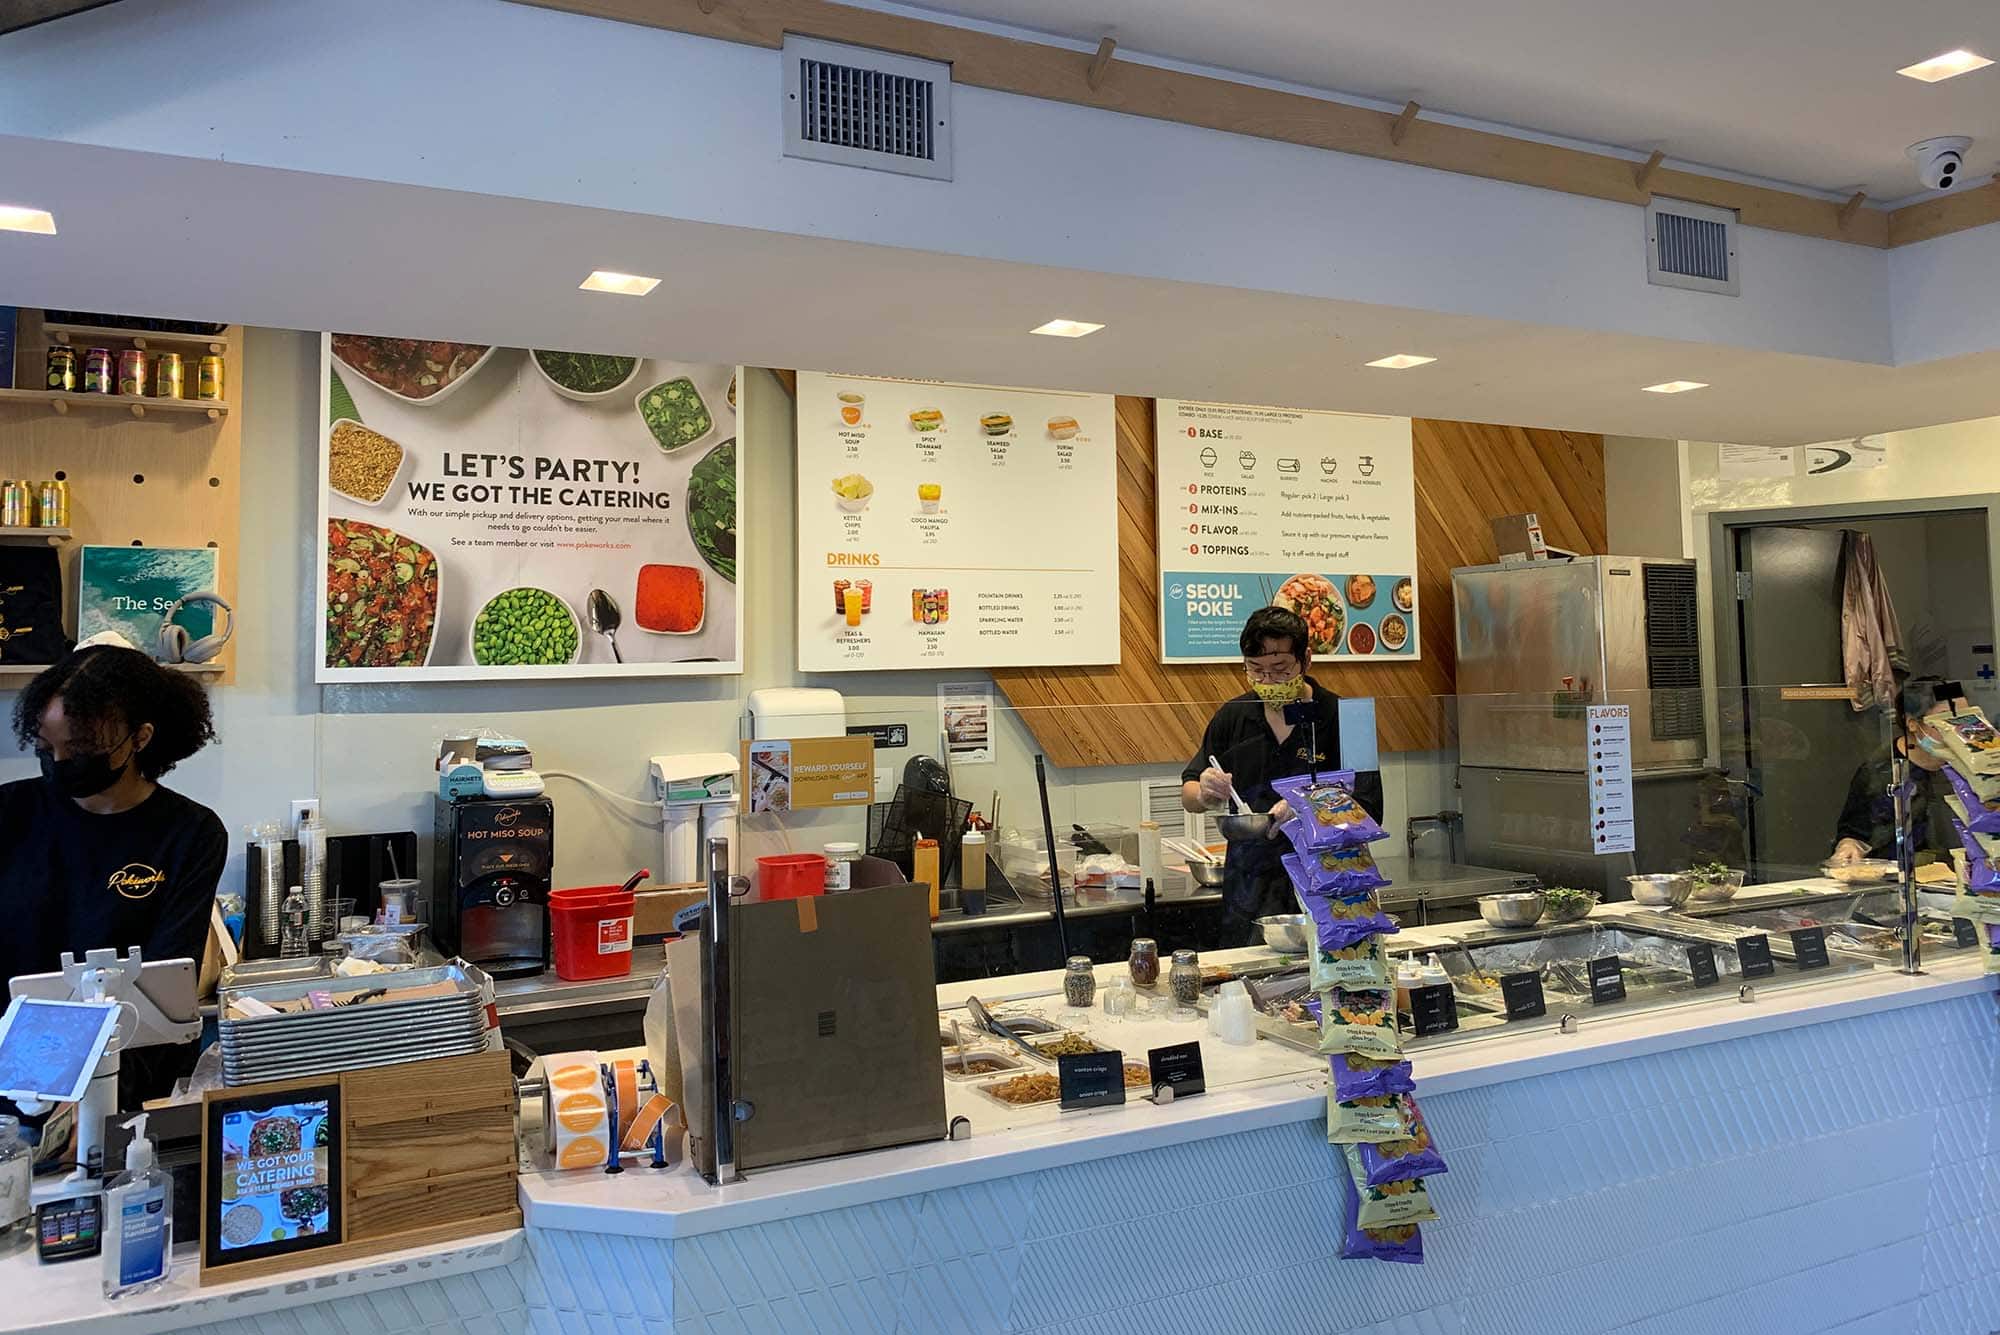 Photo taken inside Pokeworks towards the counter where people order. Two people stand behind the counter and menus are seen hanging in the background.